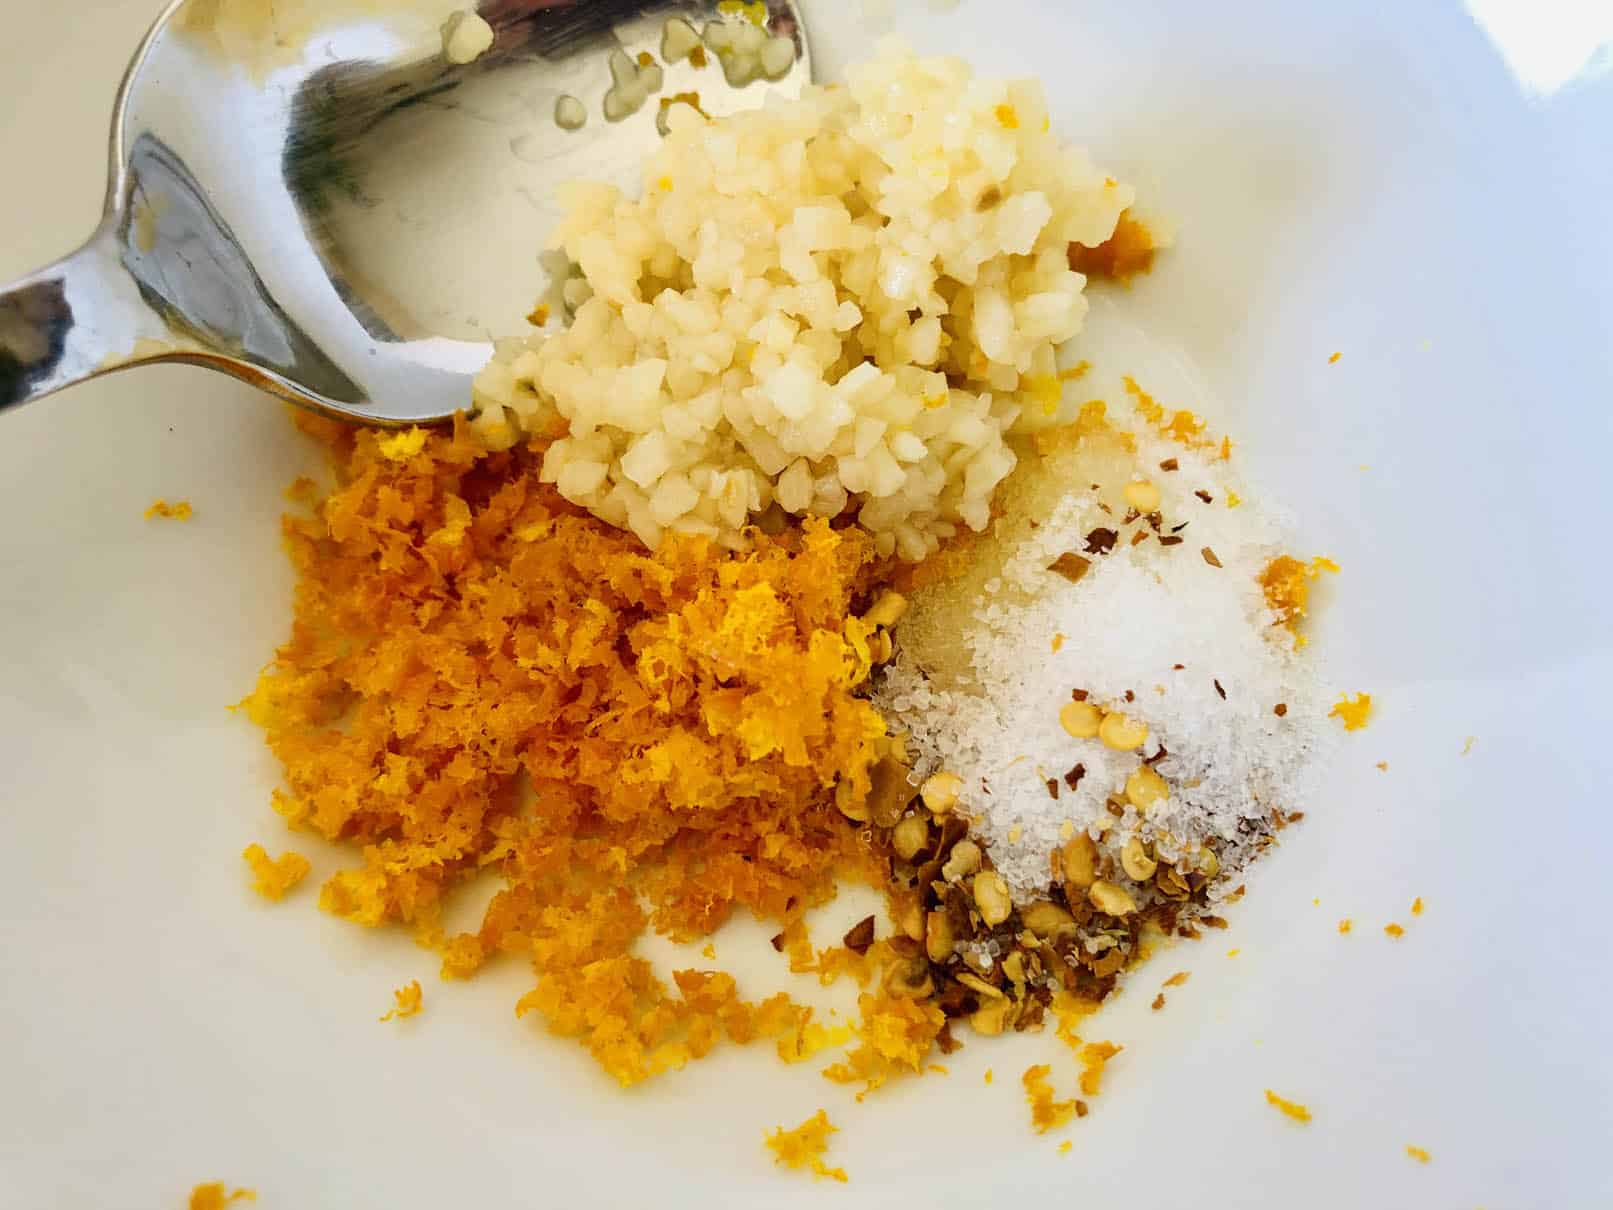 Combining orange zest, minced garlic, salt and red pepper flakes in a white bowl with a spoon.